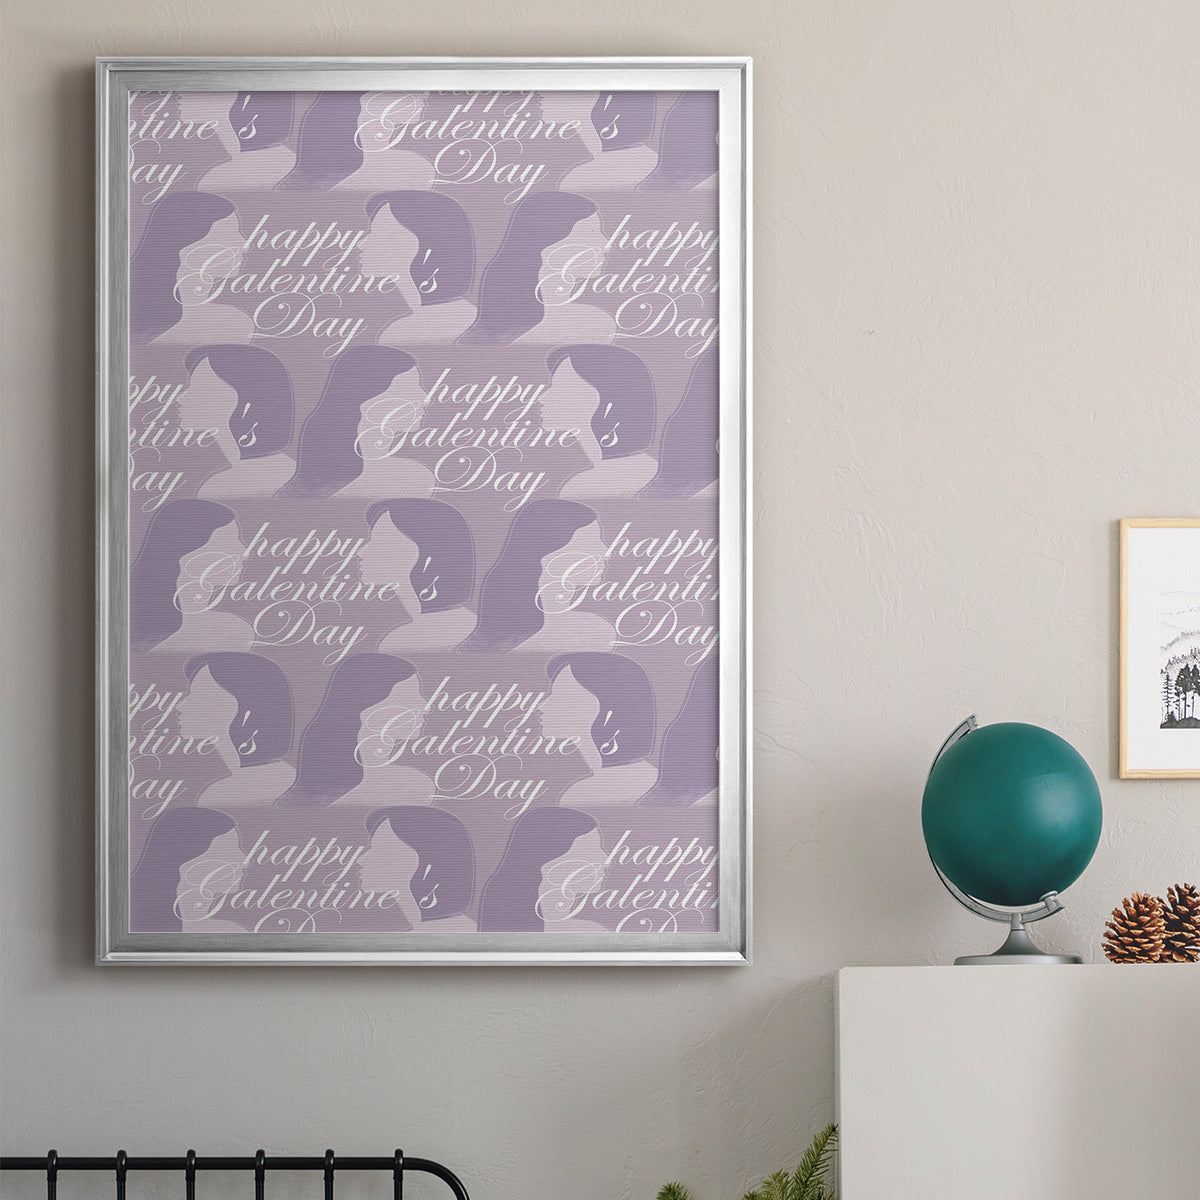 Happy Galentine's Day Collection E Premium Framed Print - Ready to Hang